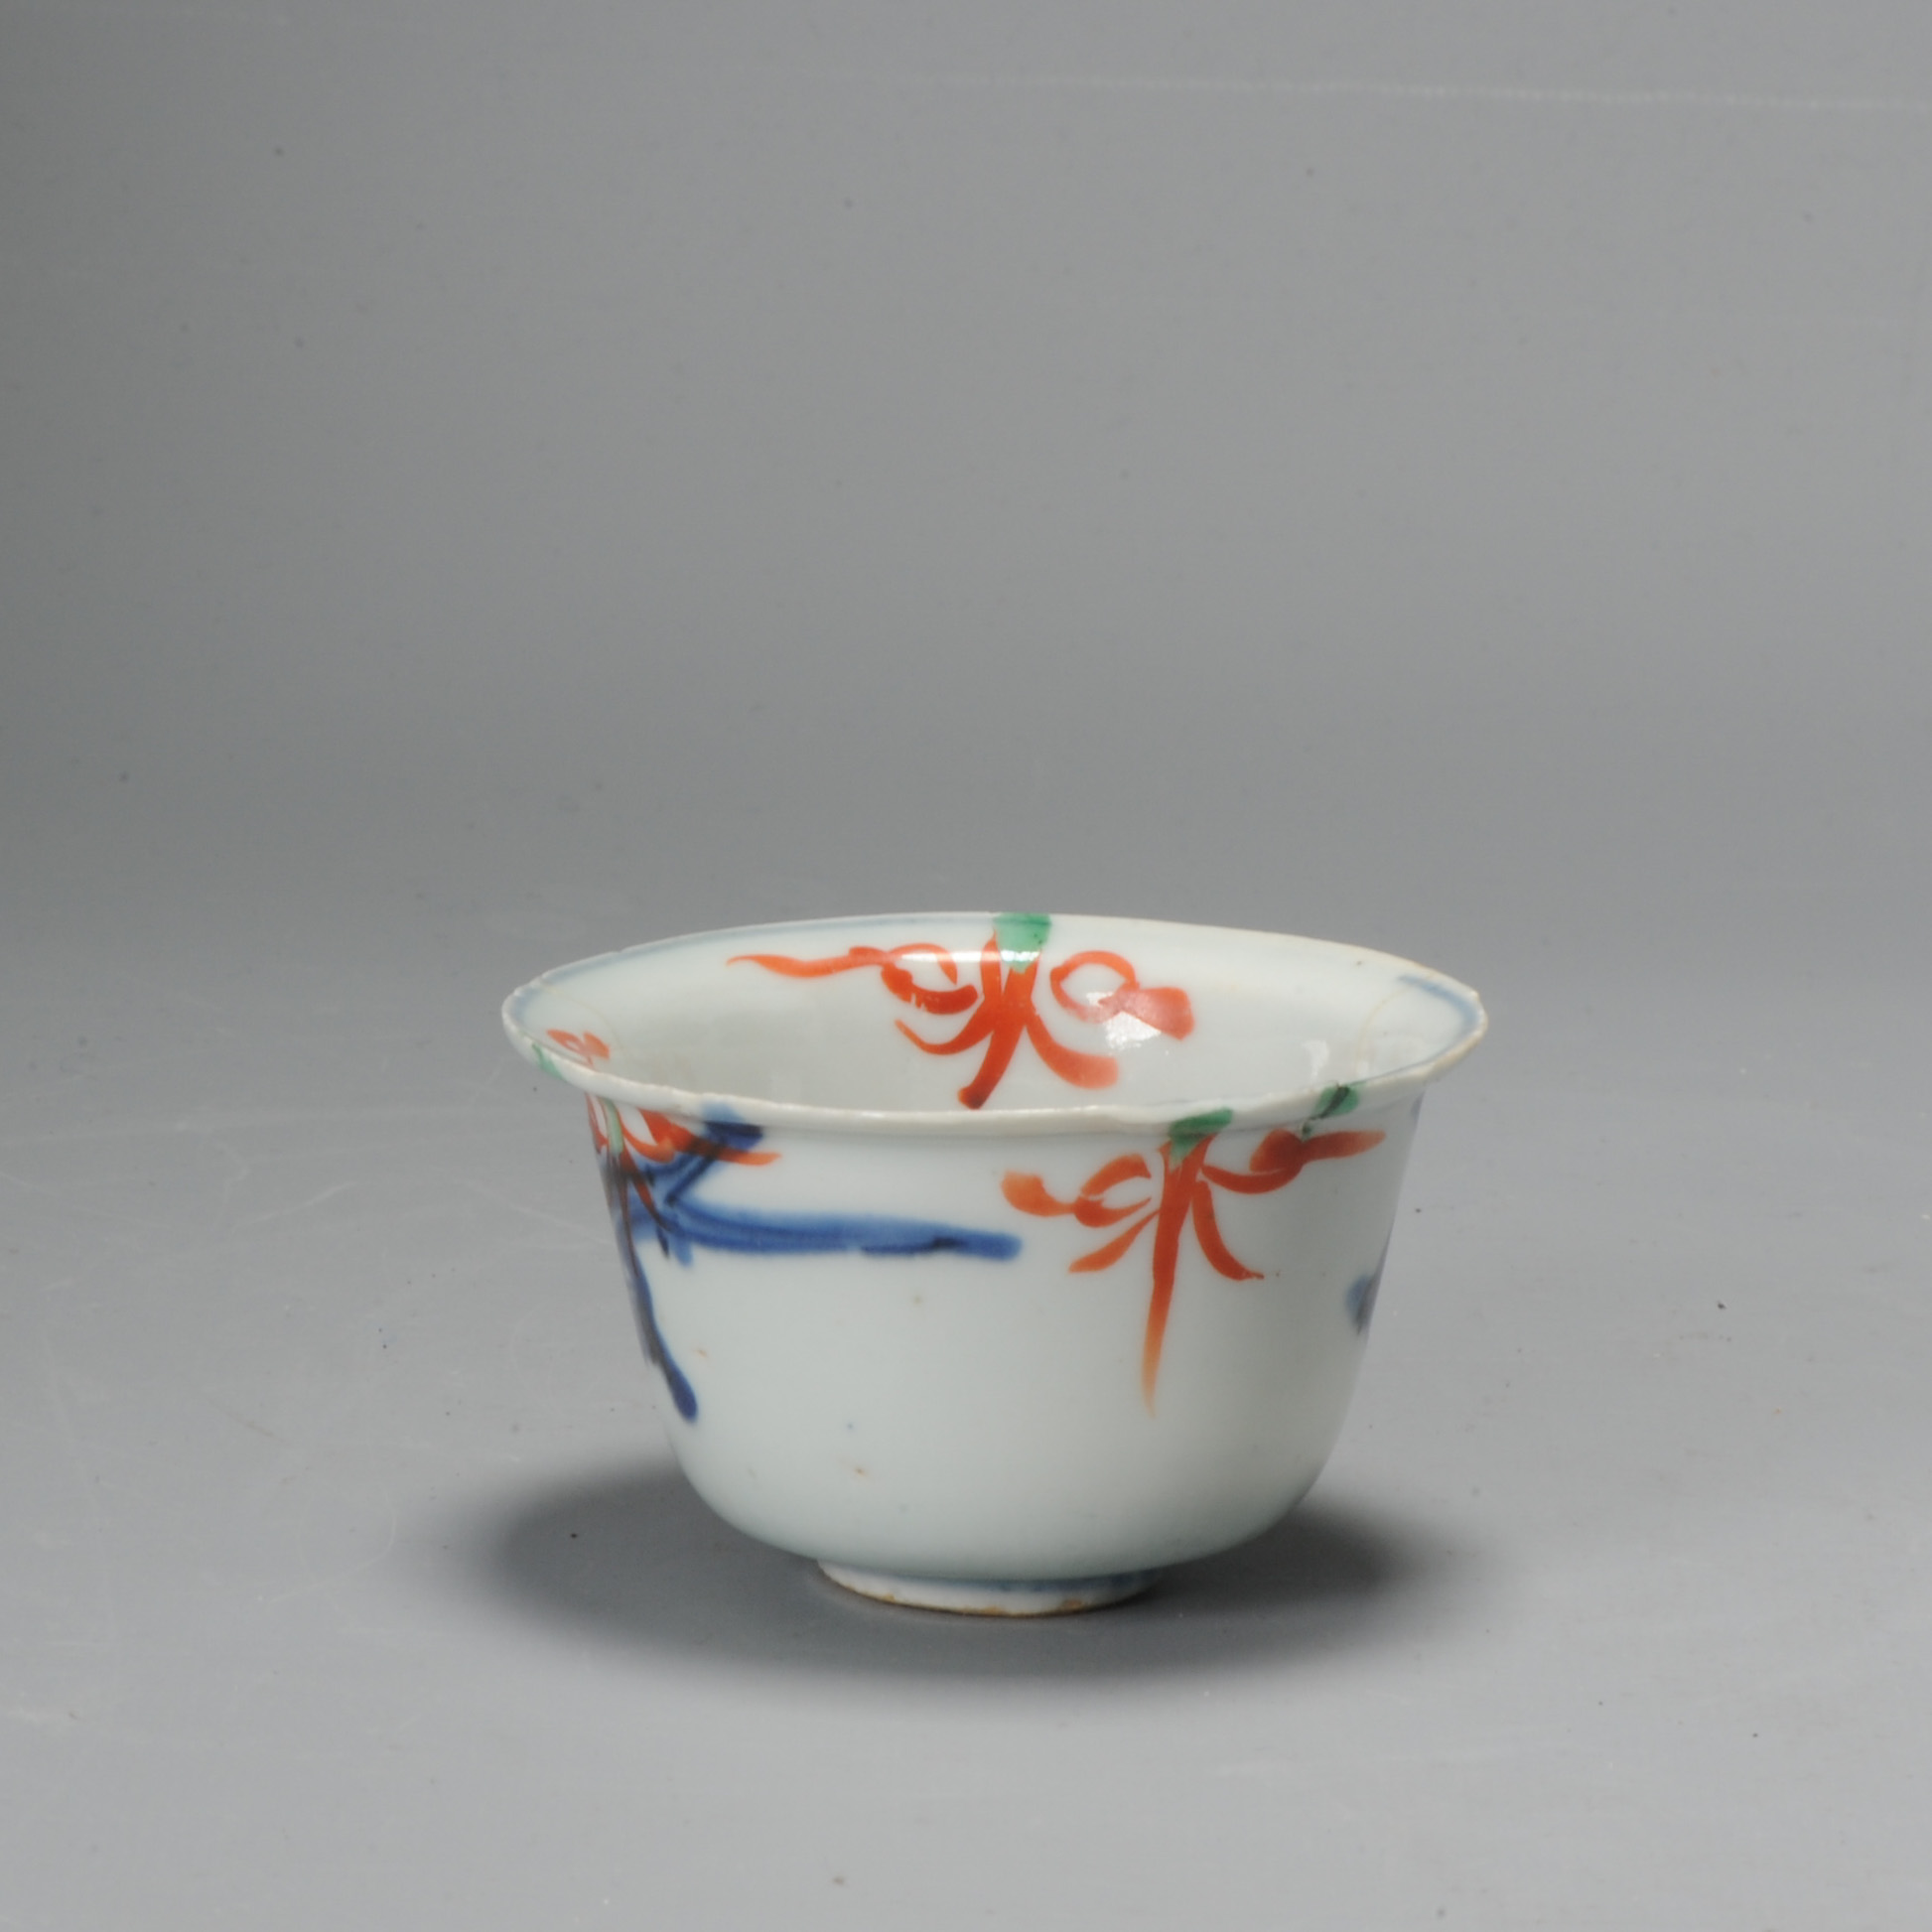 1033 A Chinese porcelain Ming Bowl, Possibly Redecorated in Japan.